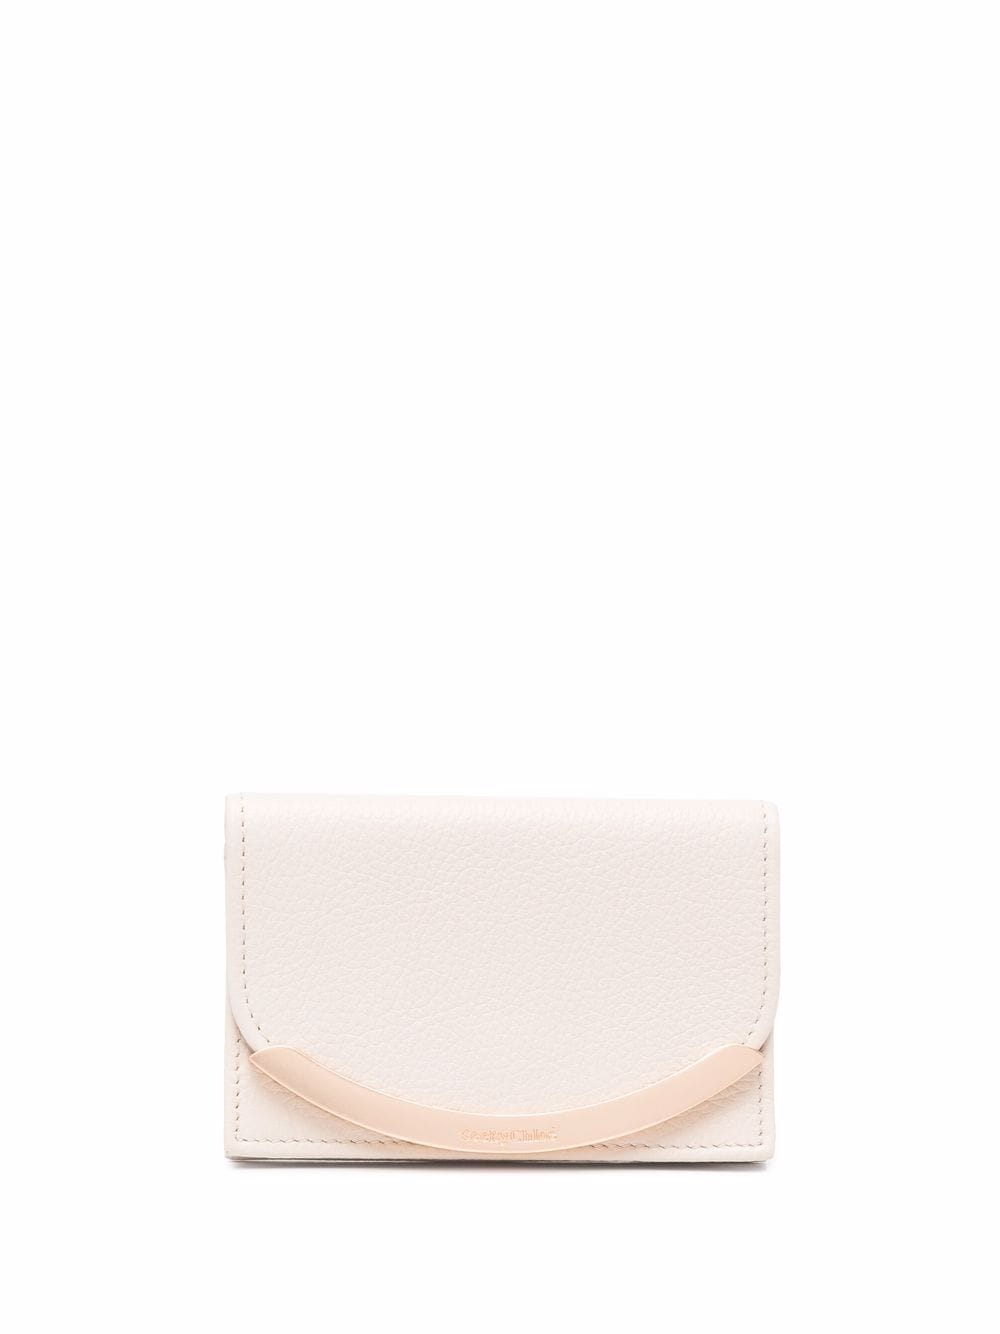 Image 1 of See by Chloé mini Lizzie wallet